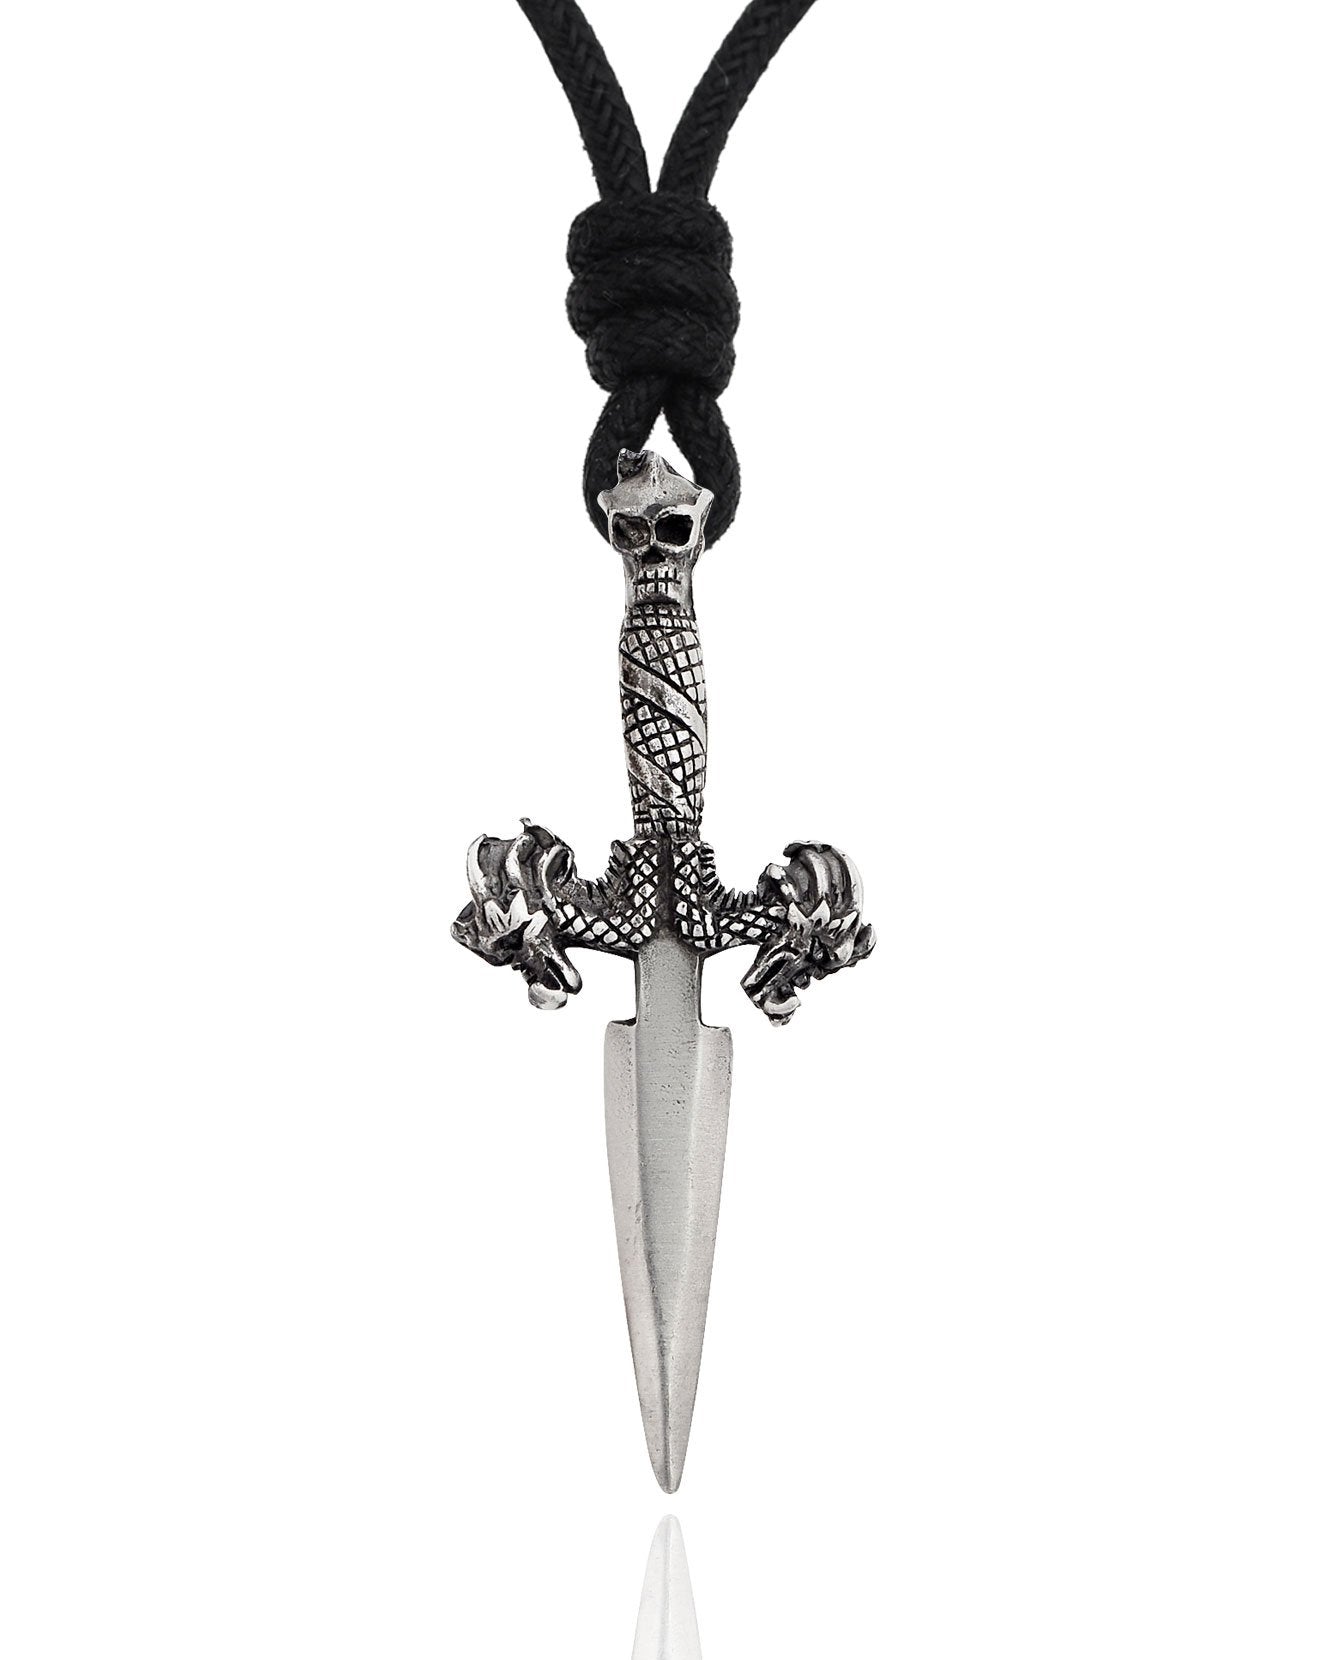 Dragon Sword Silver Pewter Charm Necklace Pendant Jewelry